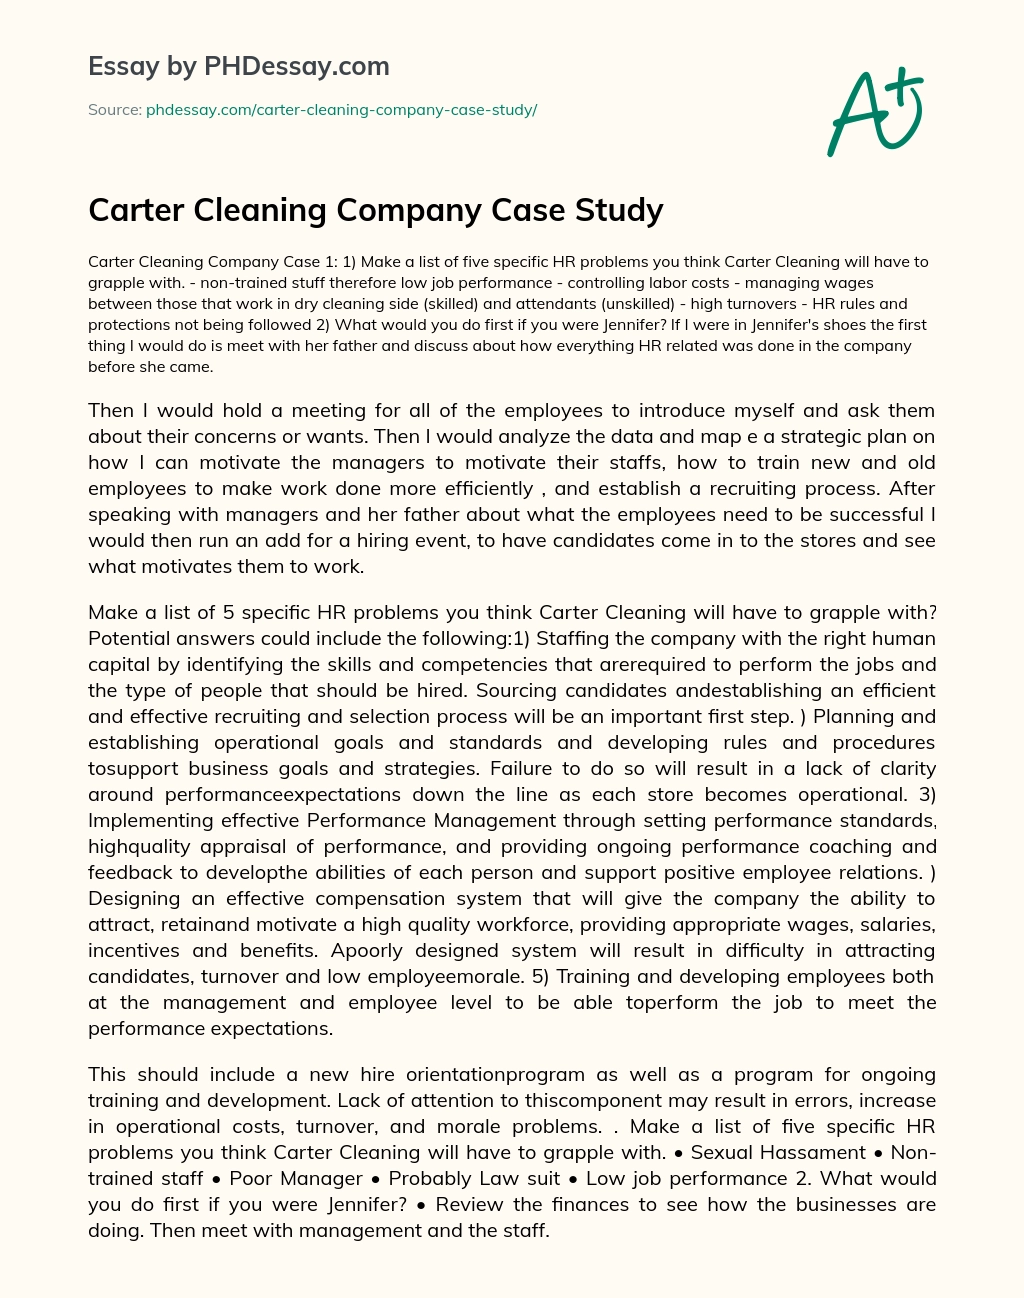 carter cleaning company case study